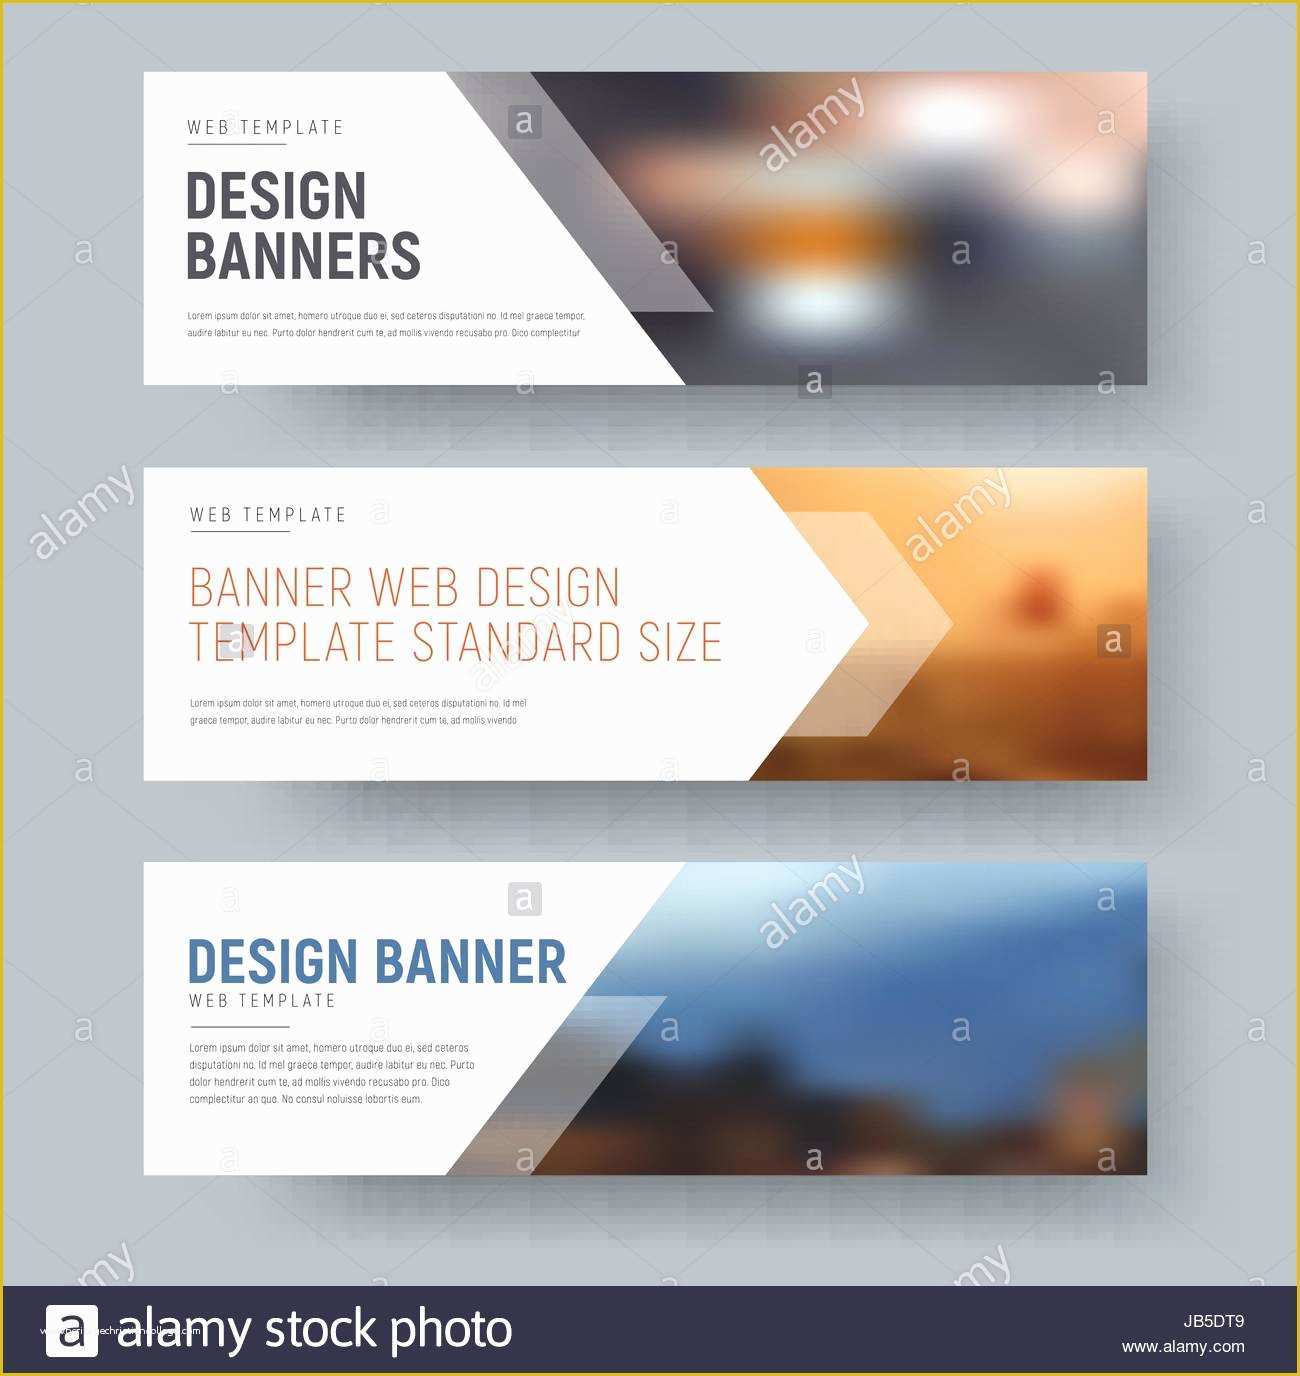 Free Email Banner Templates Of Design Of Standard Horizontal Web Banners with Space for